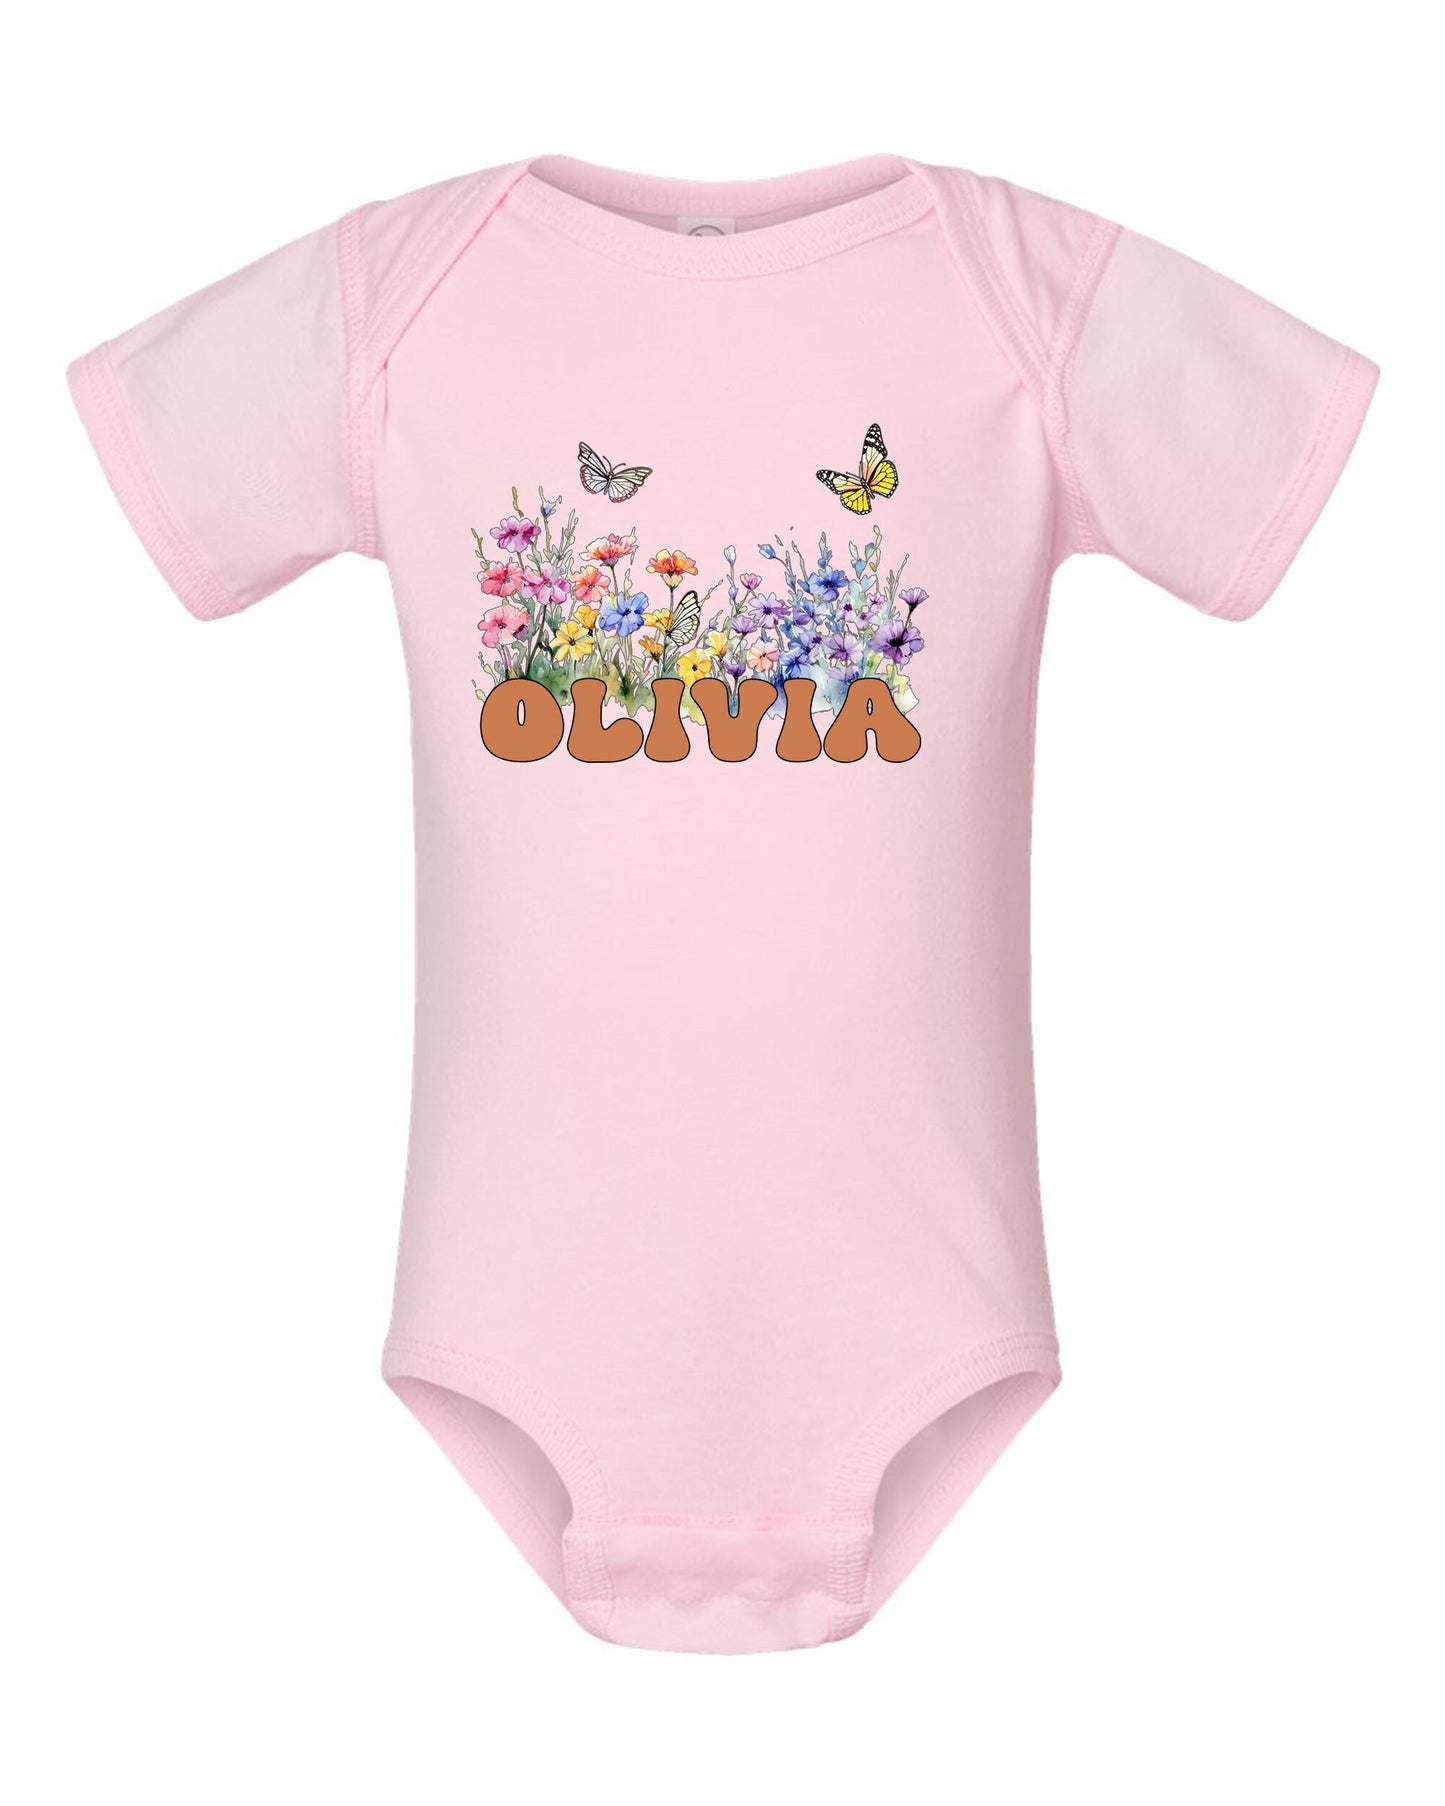 Infant bodysuit pink color with wildflower 